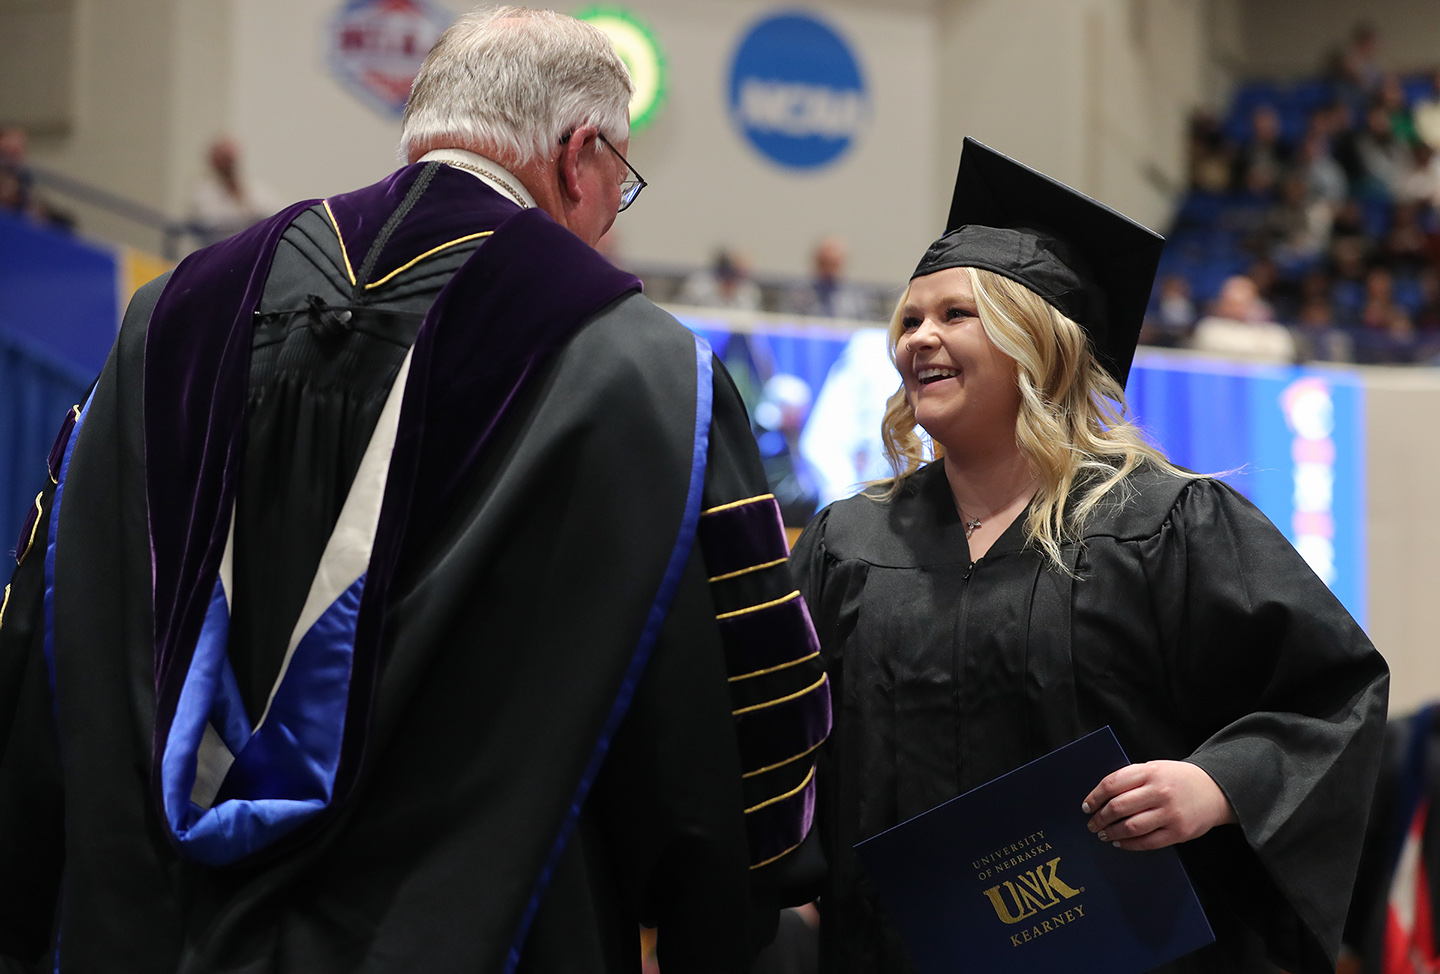 Amanda Francescato graduated from UNK on Friday with a bachelor’s degree in art education and a minor in photography. (Photo by Erika Pritchard, UNK Communications)